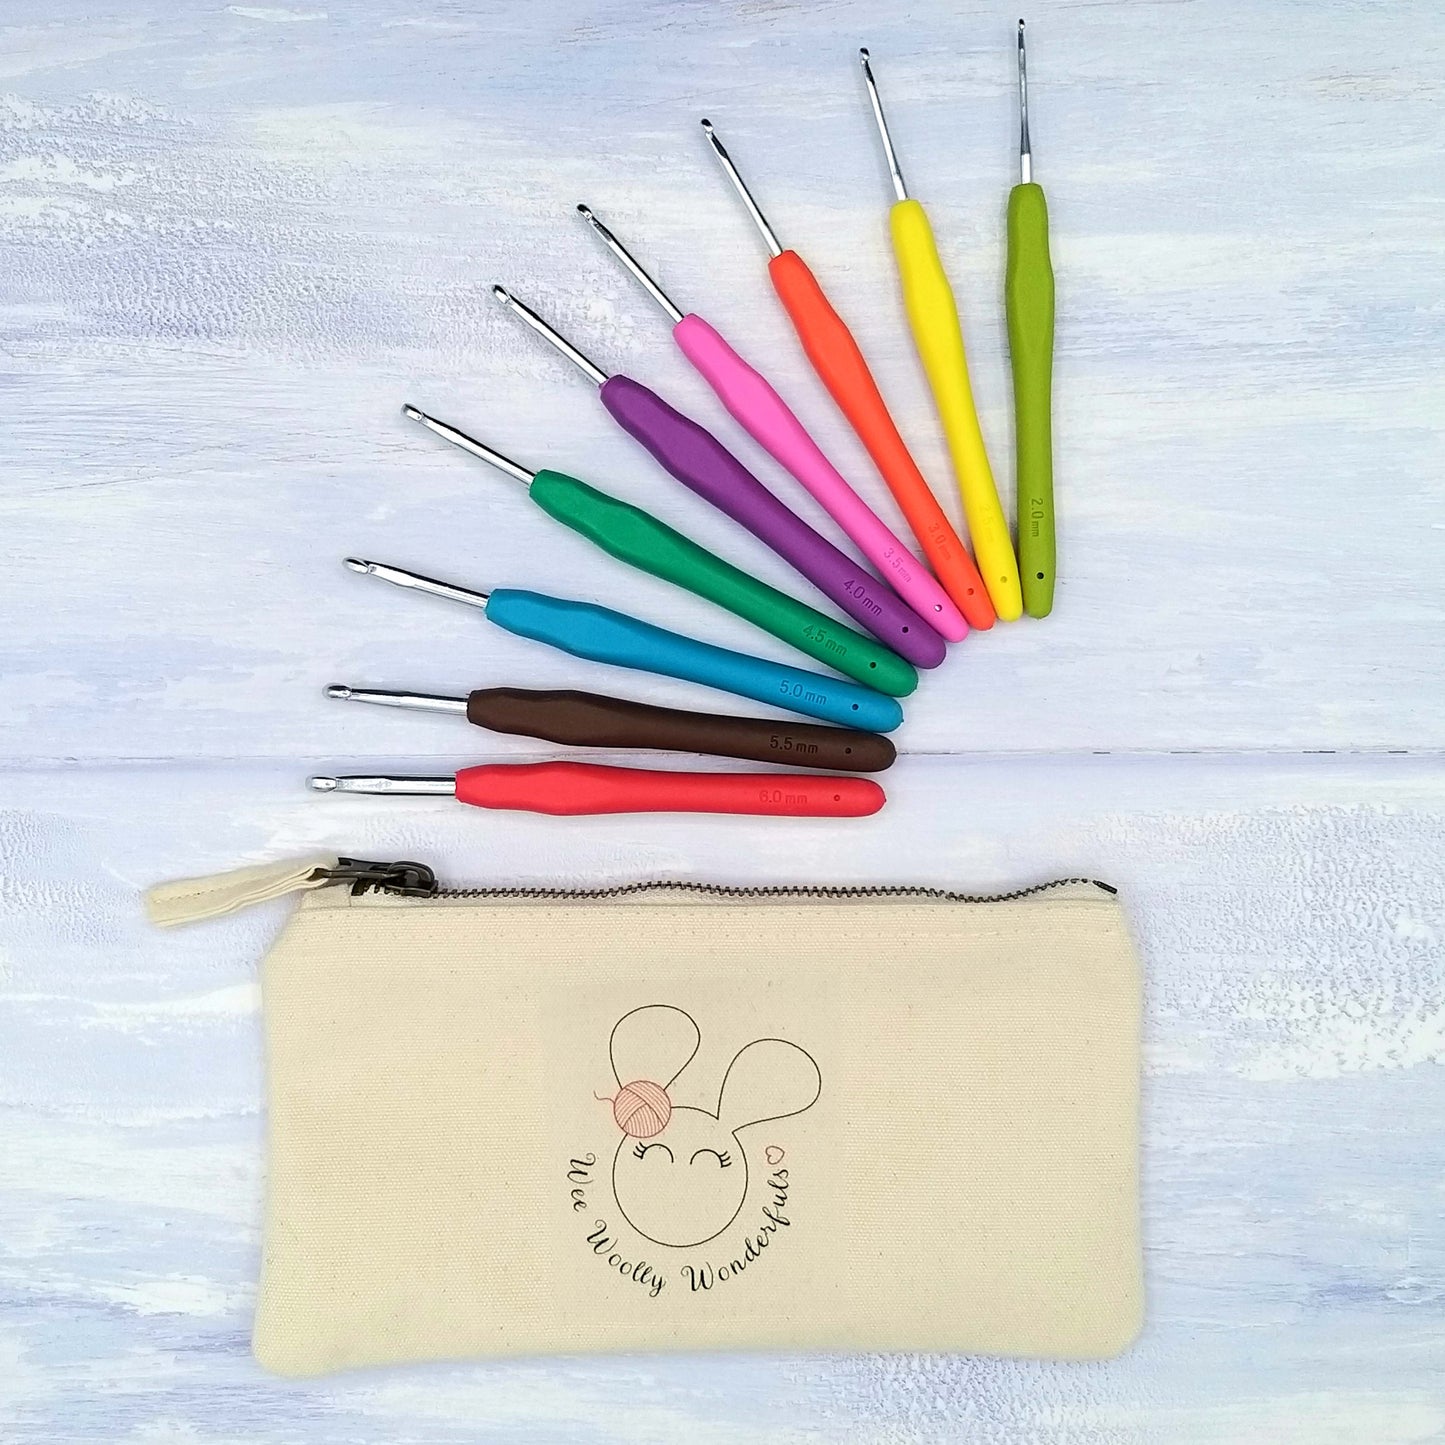 Small Zip Case - available with Crochet Hook Set